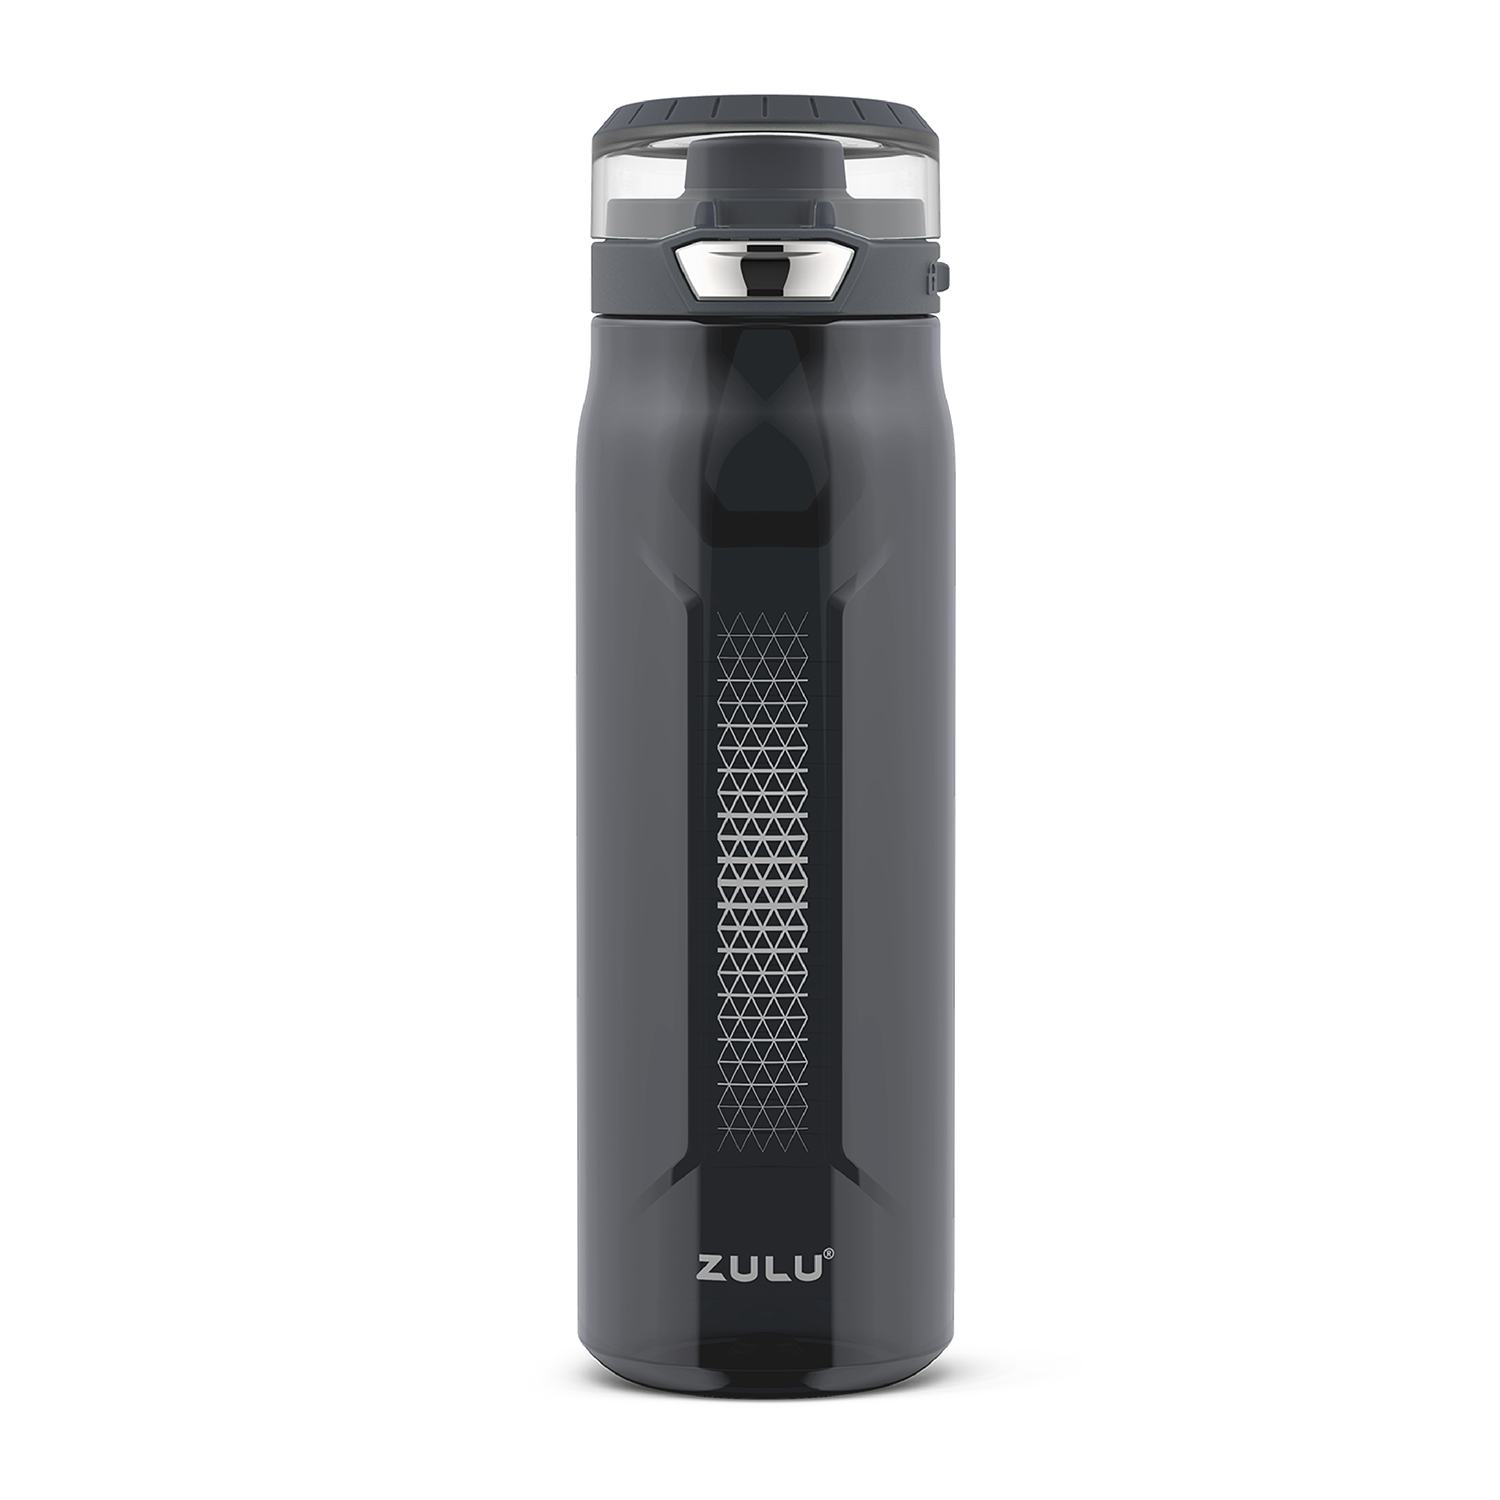 Tritan Water Bottle with Filter: 24oz BPA-Free | Clearly Filtered